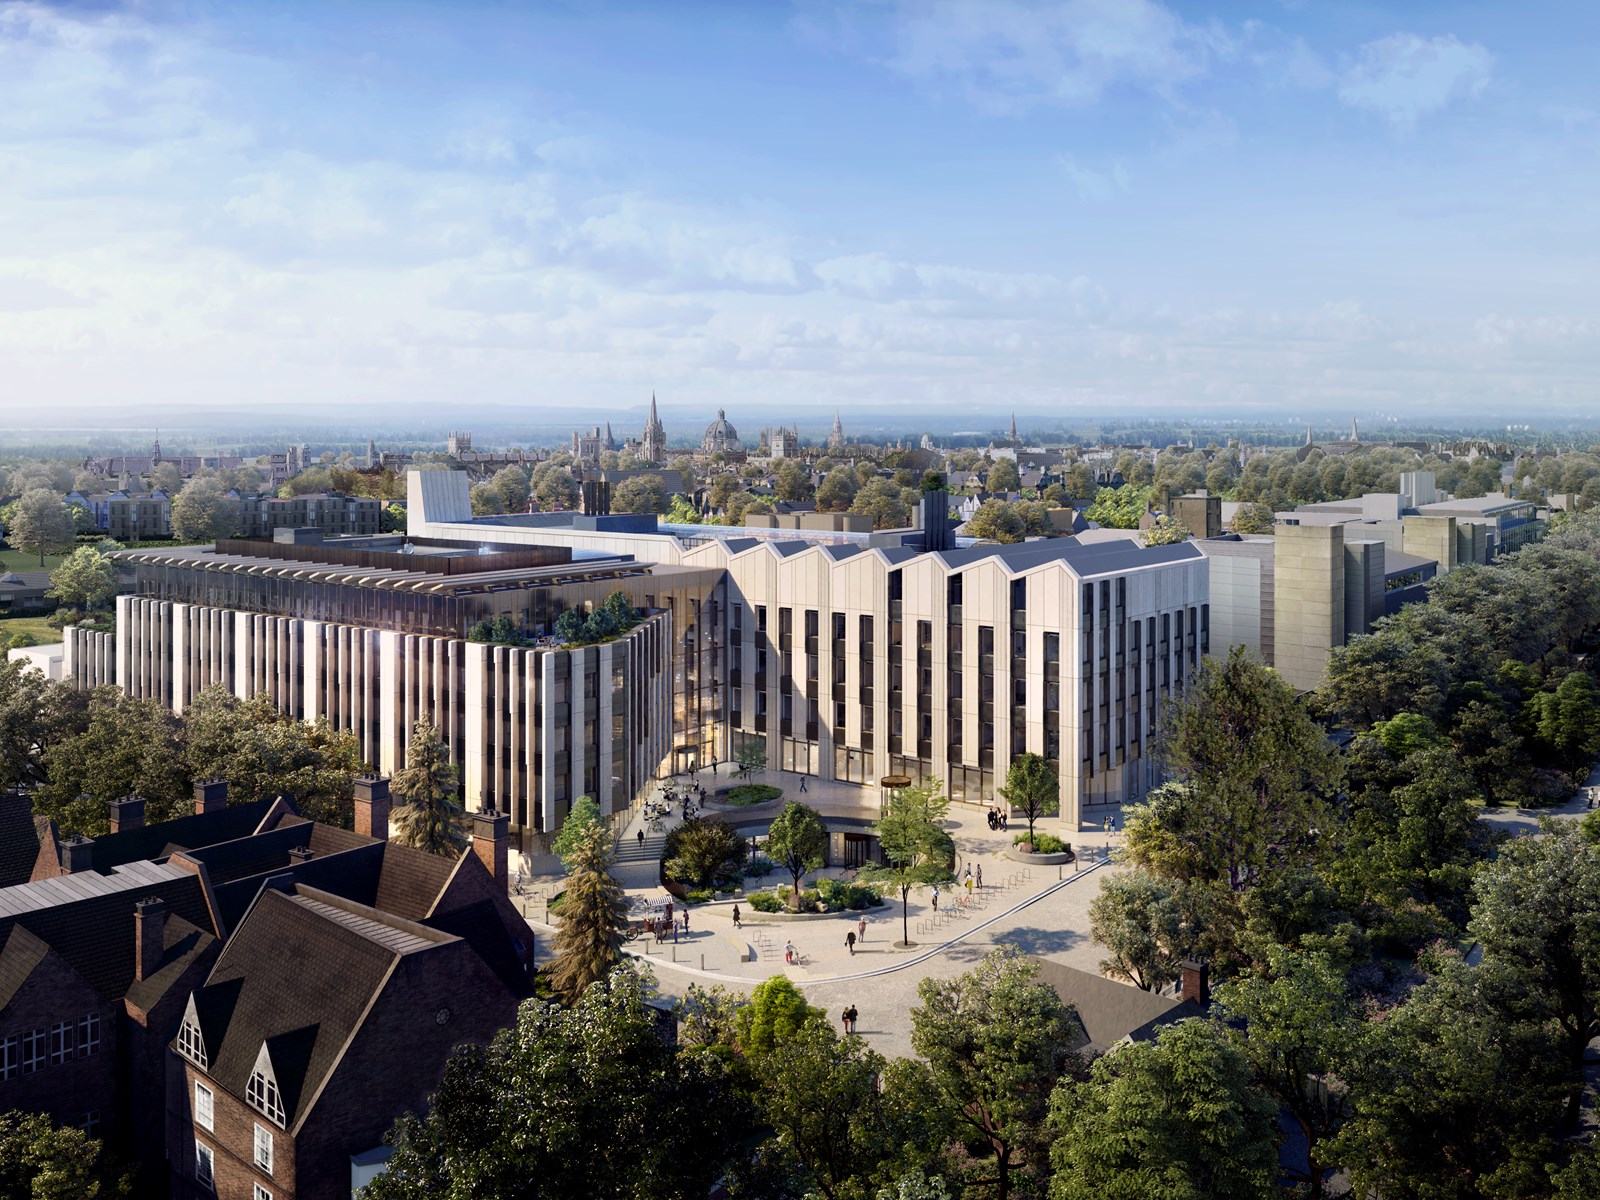 Oxford University’s Largest Ever Building Project Gains Planning Consent